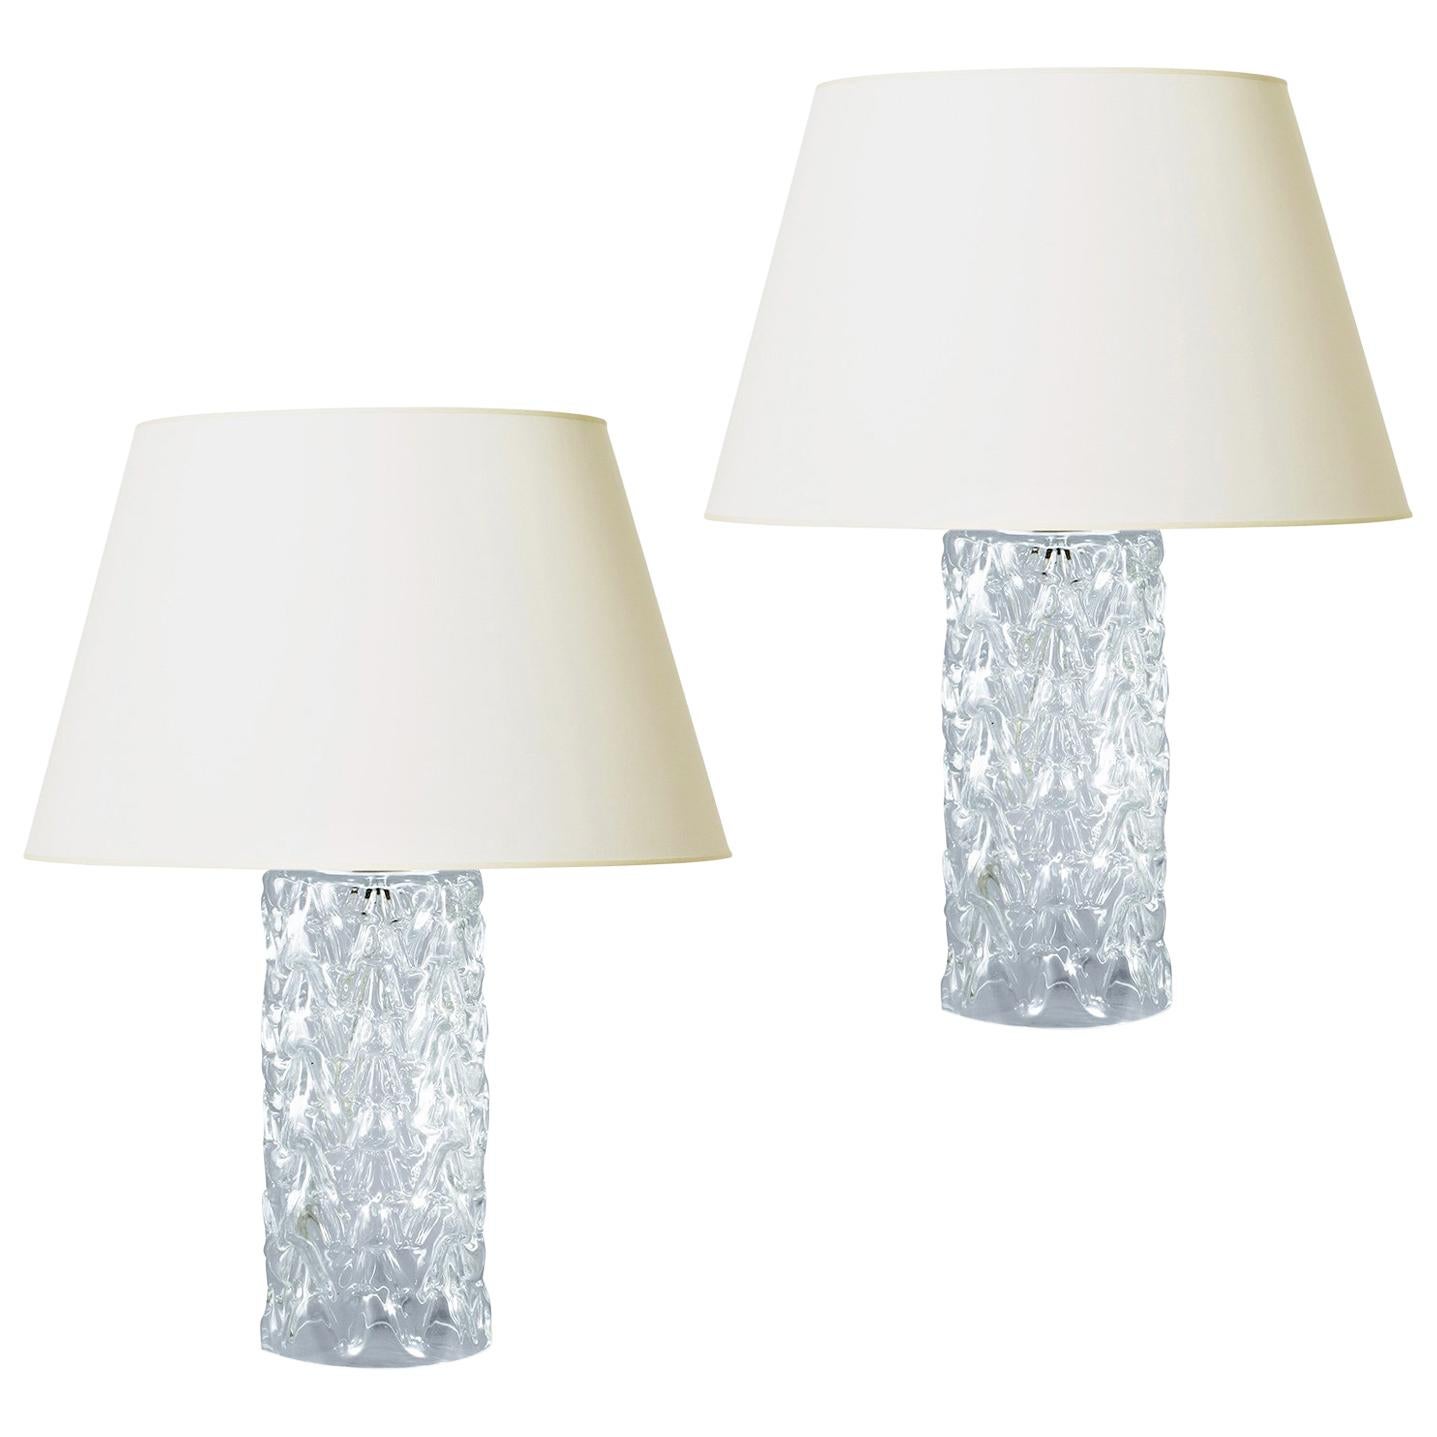 Pair of Table Lamps with Sculptural Faceted Crystal Bases by Orrefors For Sale